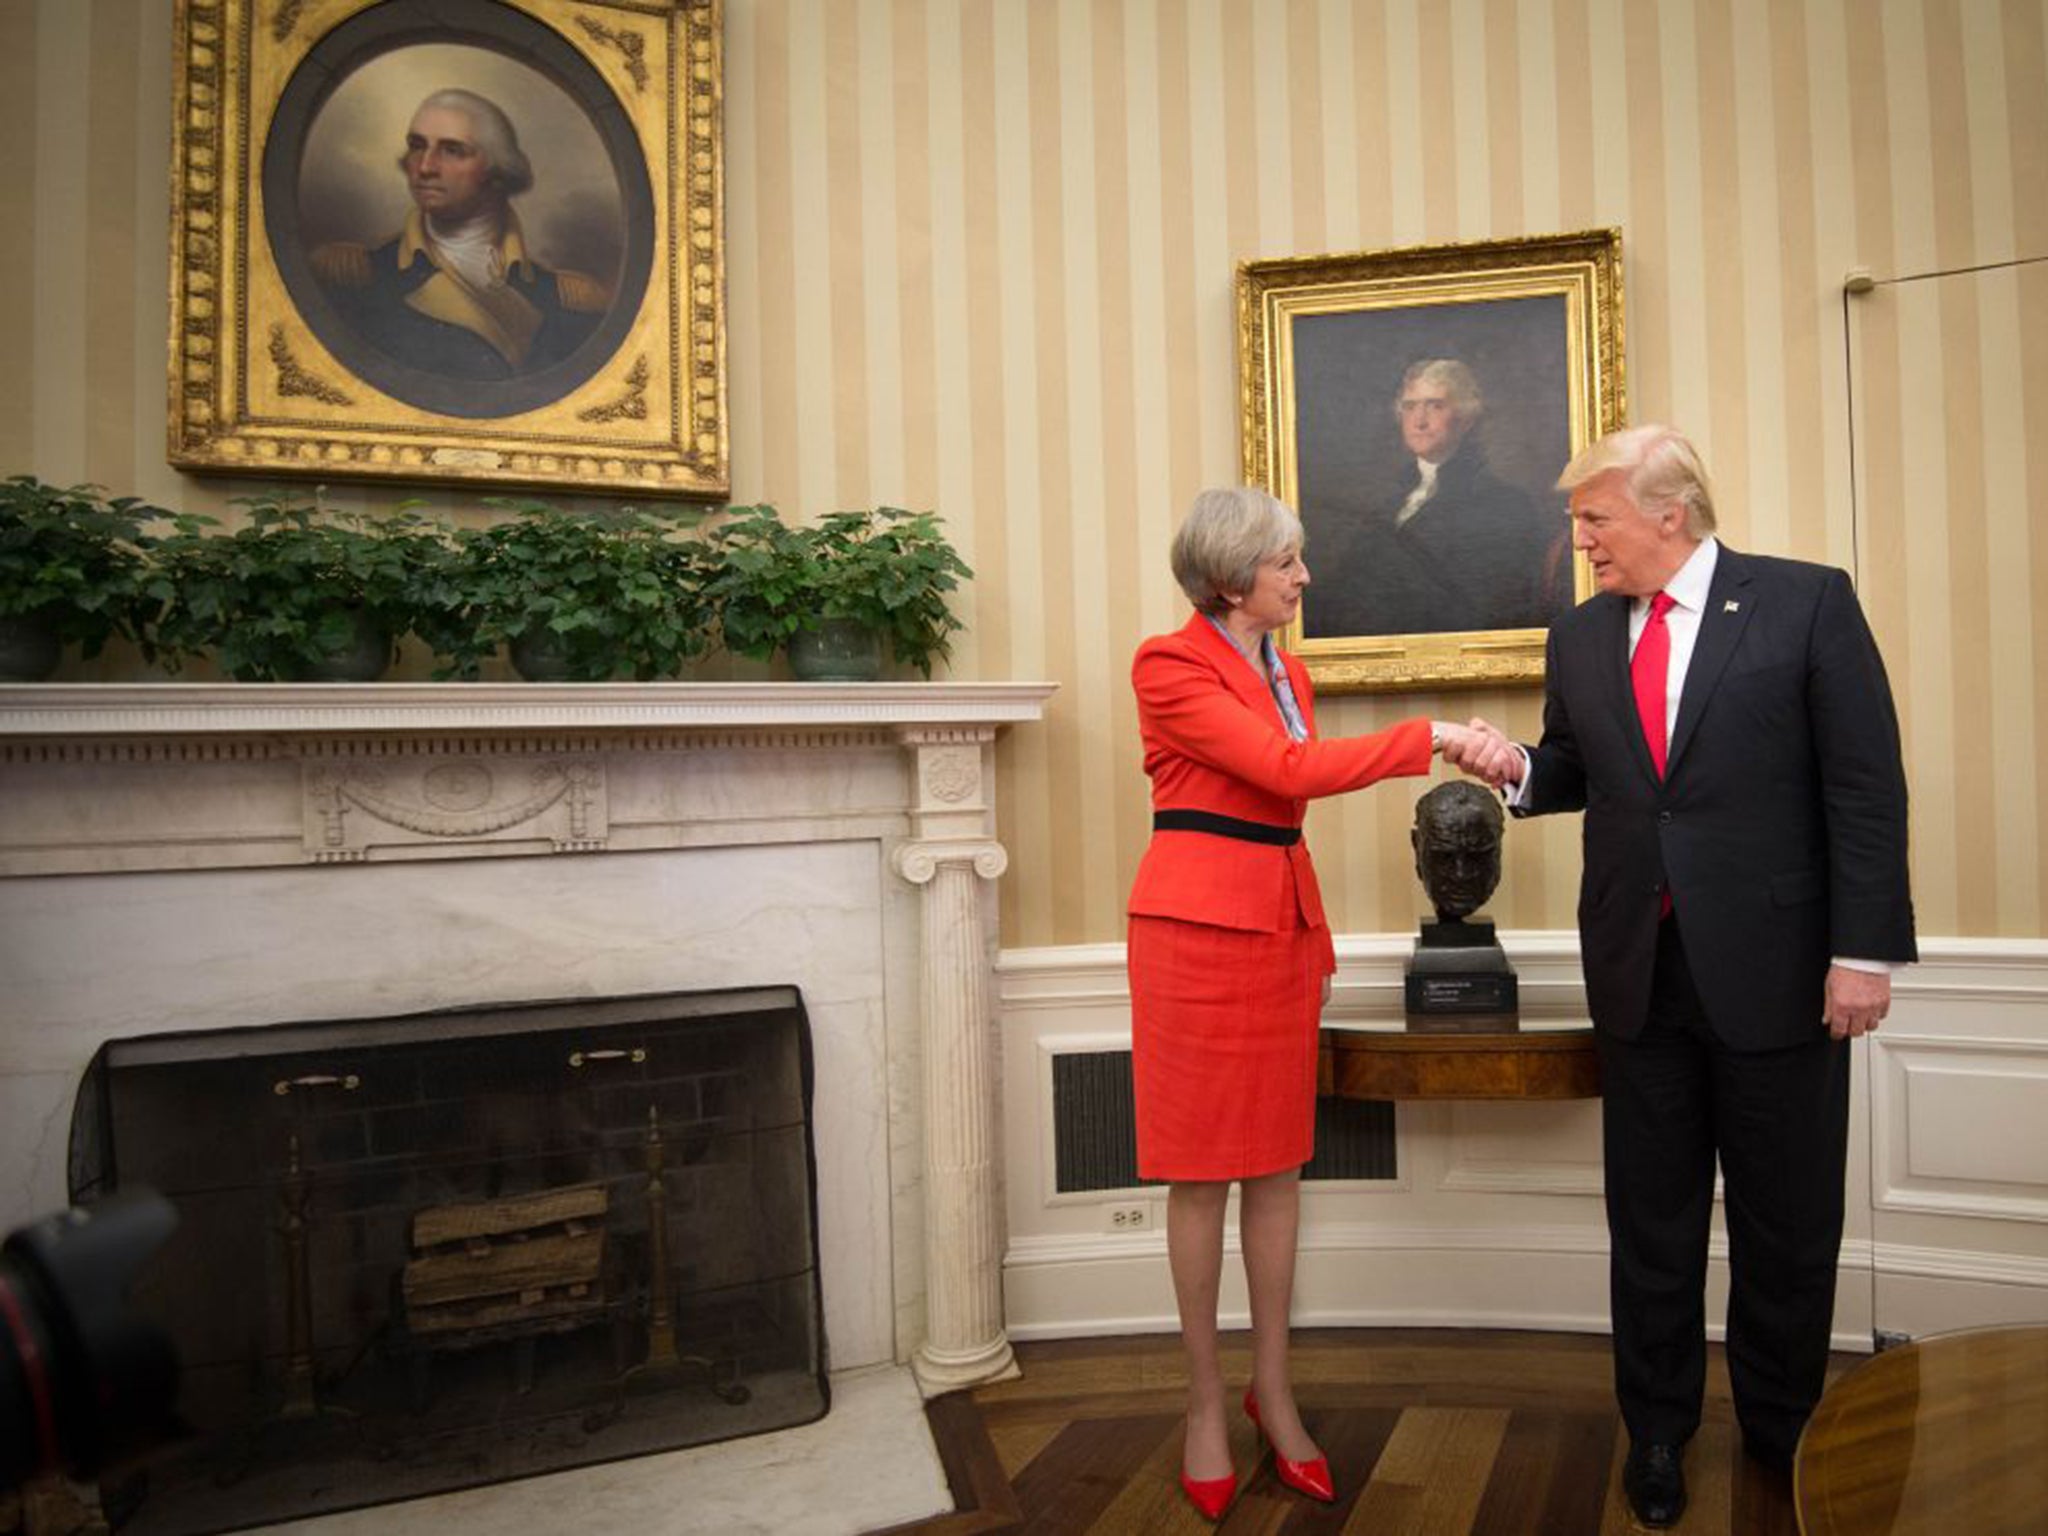 Americans don't really care about Theresa May visiting the White House